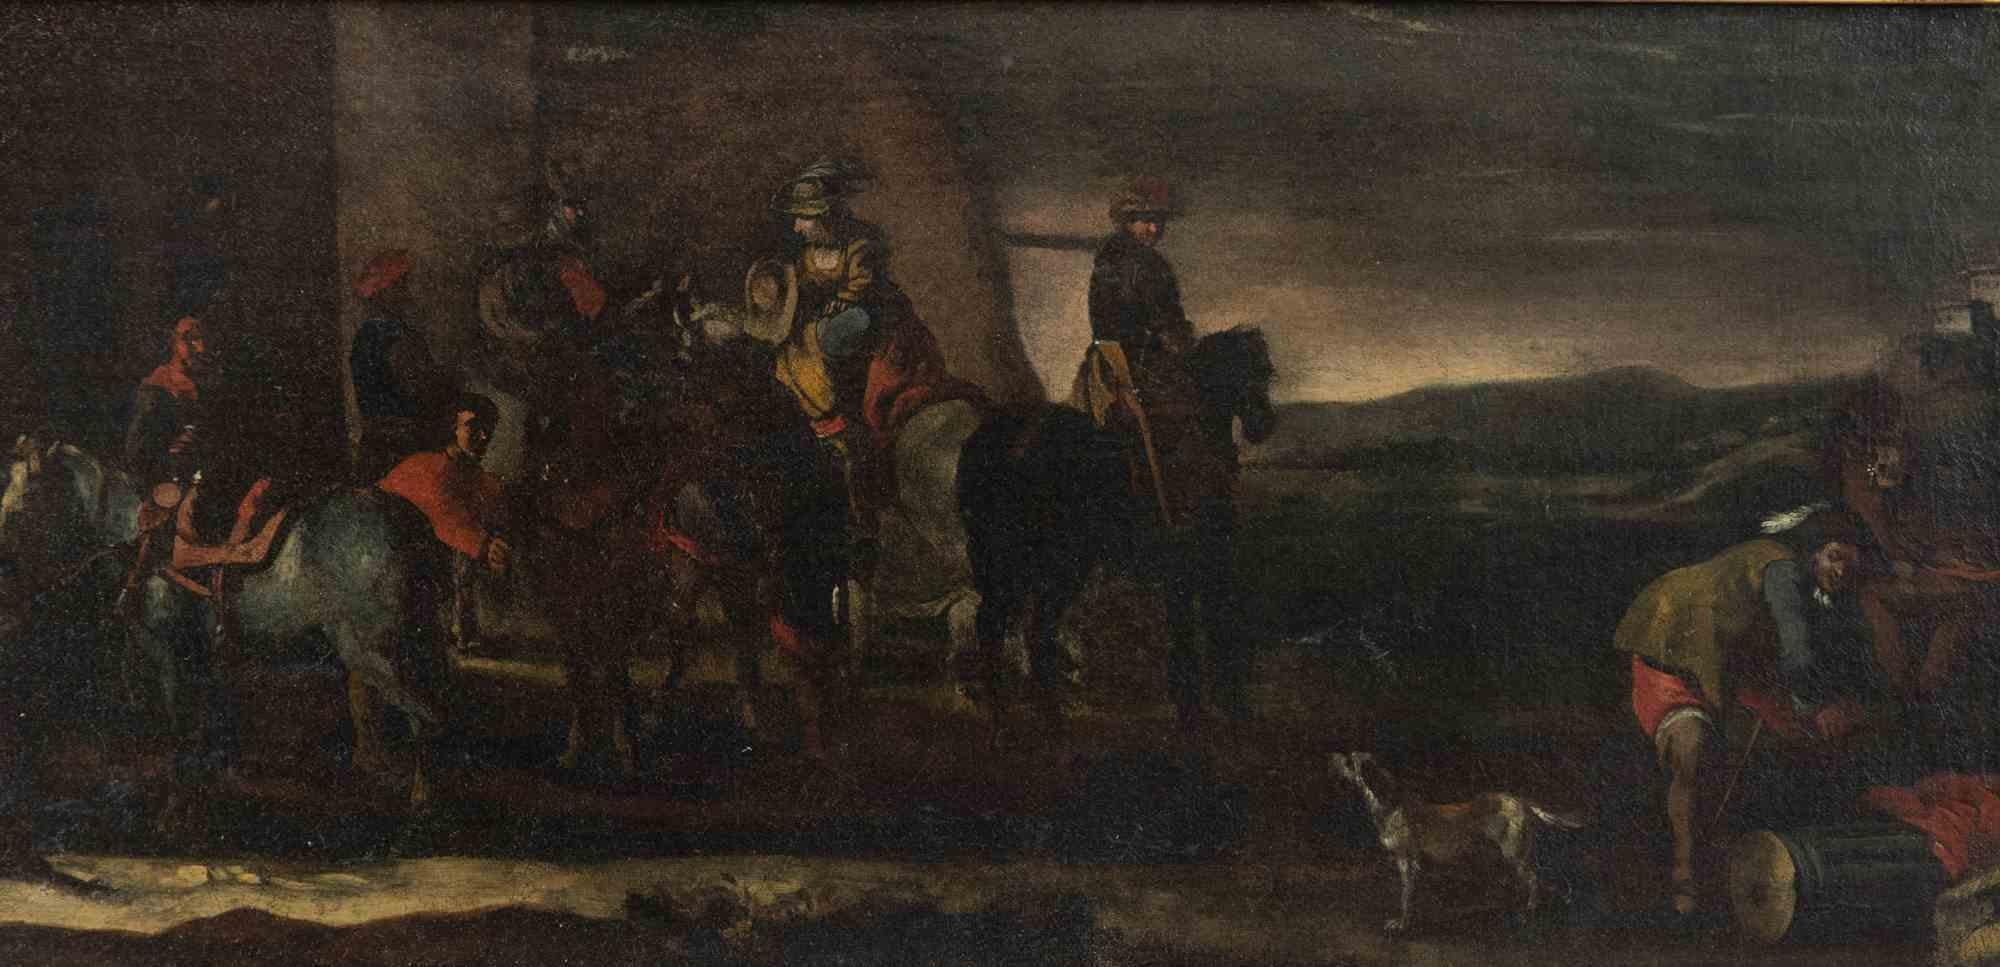 Knights - Painting by Peter Van Lear -  17th Century 